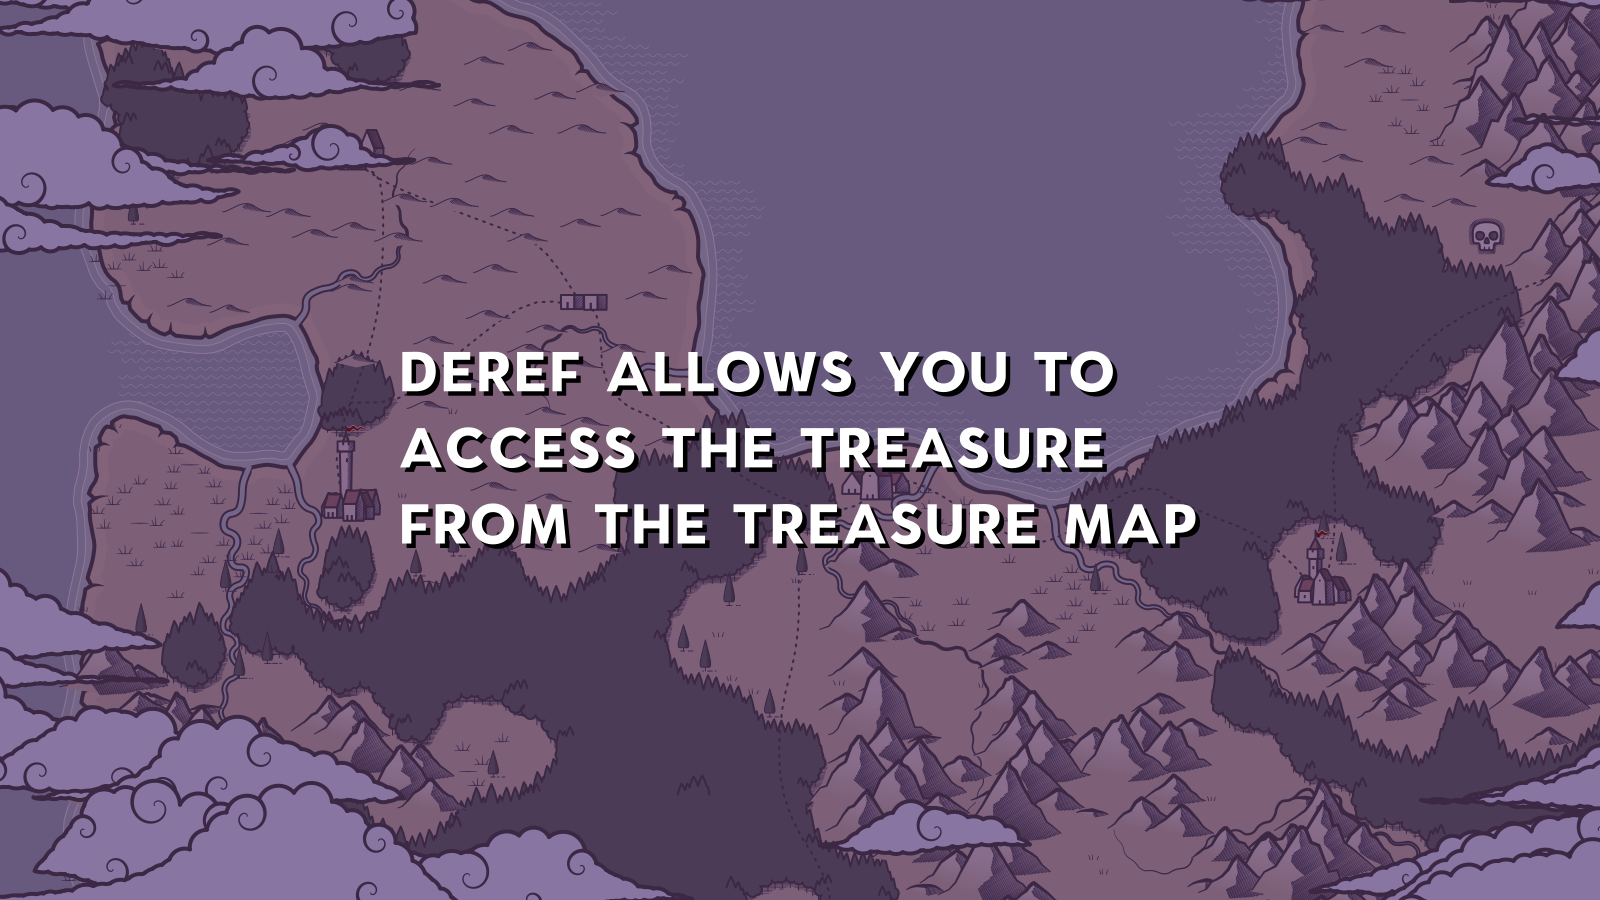 A fantasy map with overlay text, "Deref allows you to access the treasure from the treasure map."